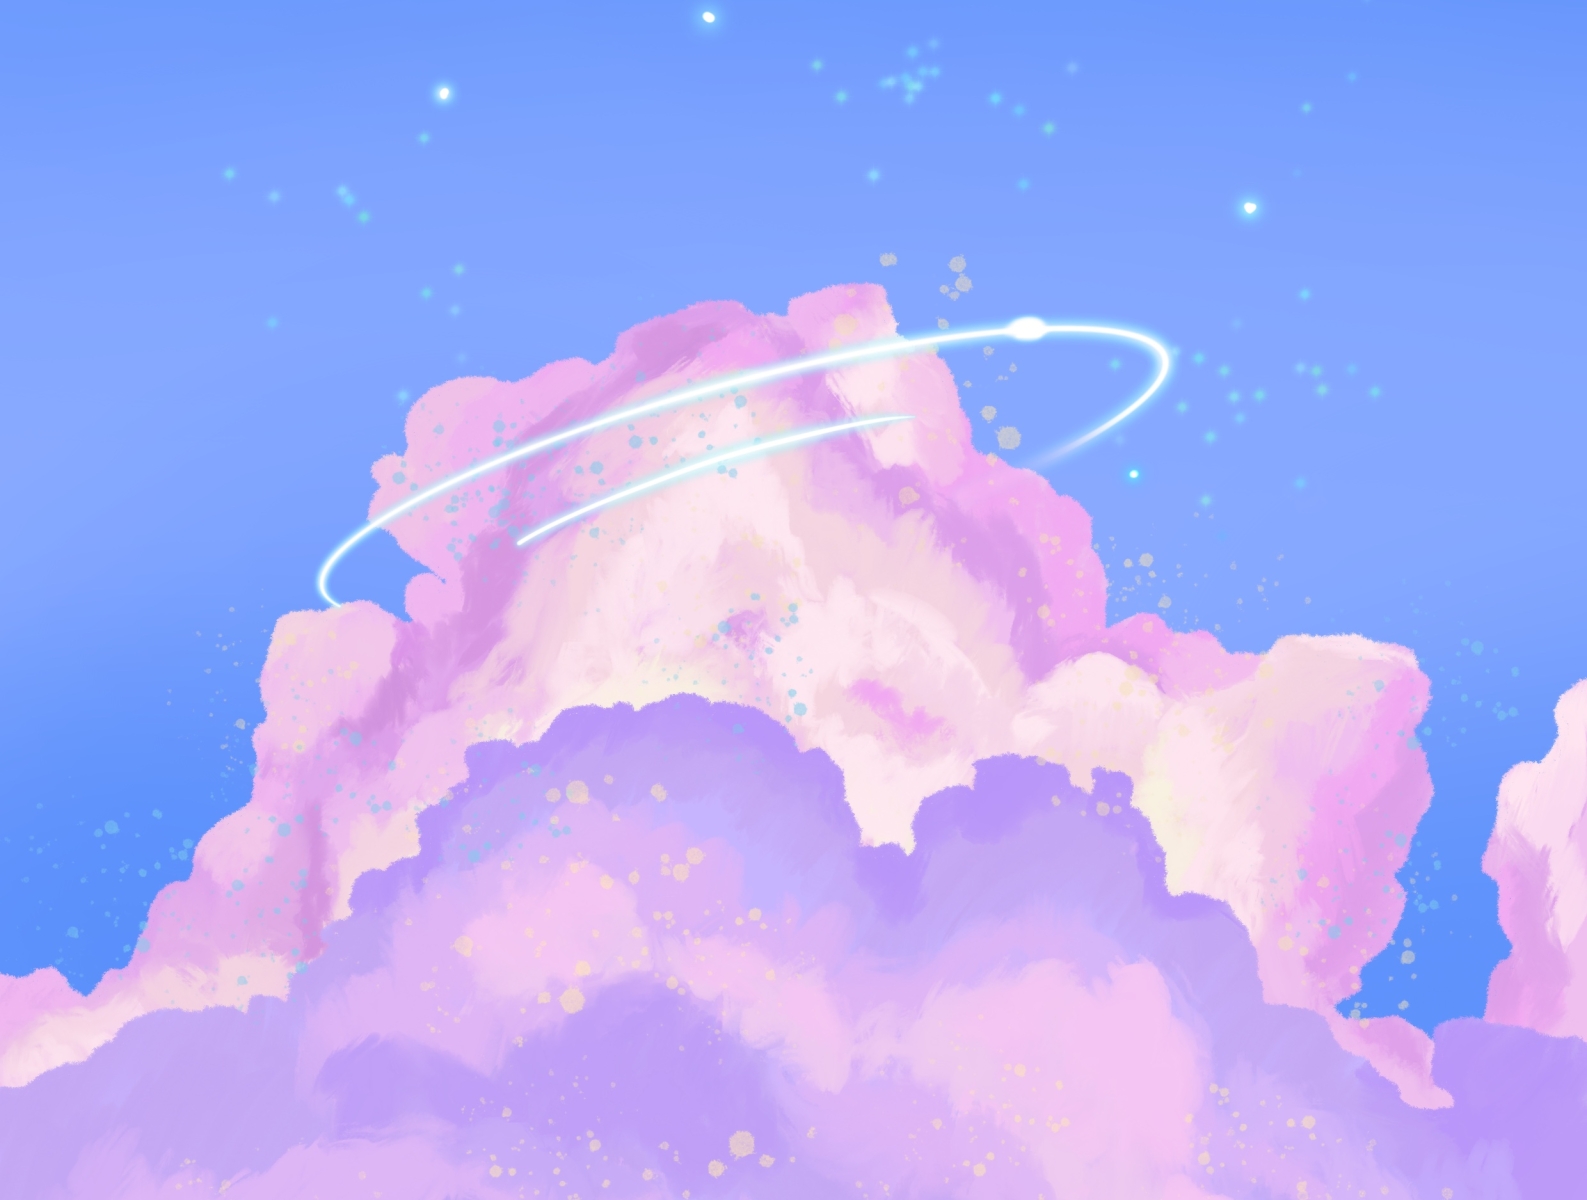 Cloud by HOLOBABY on Dribbble